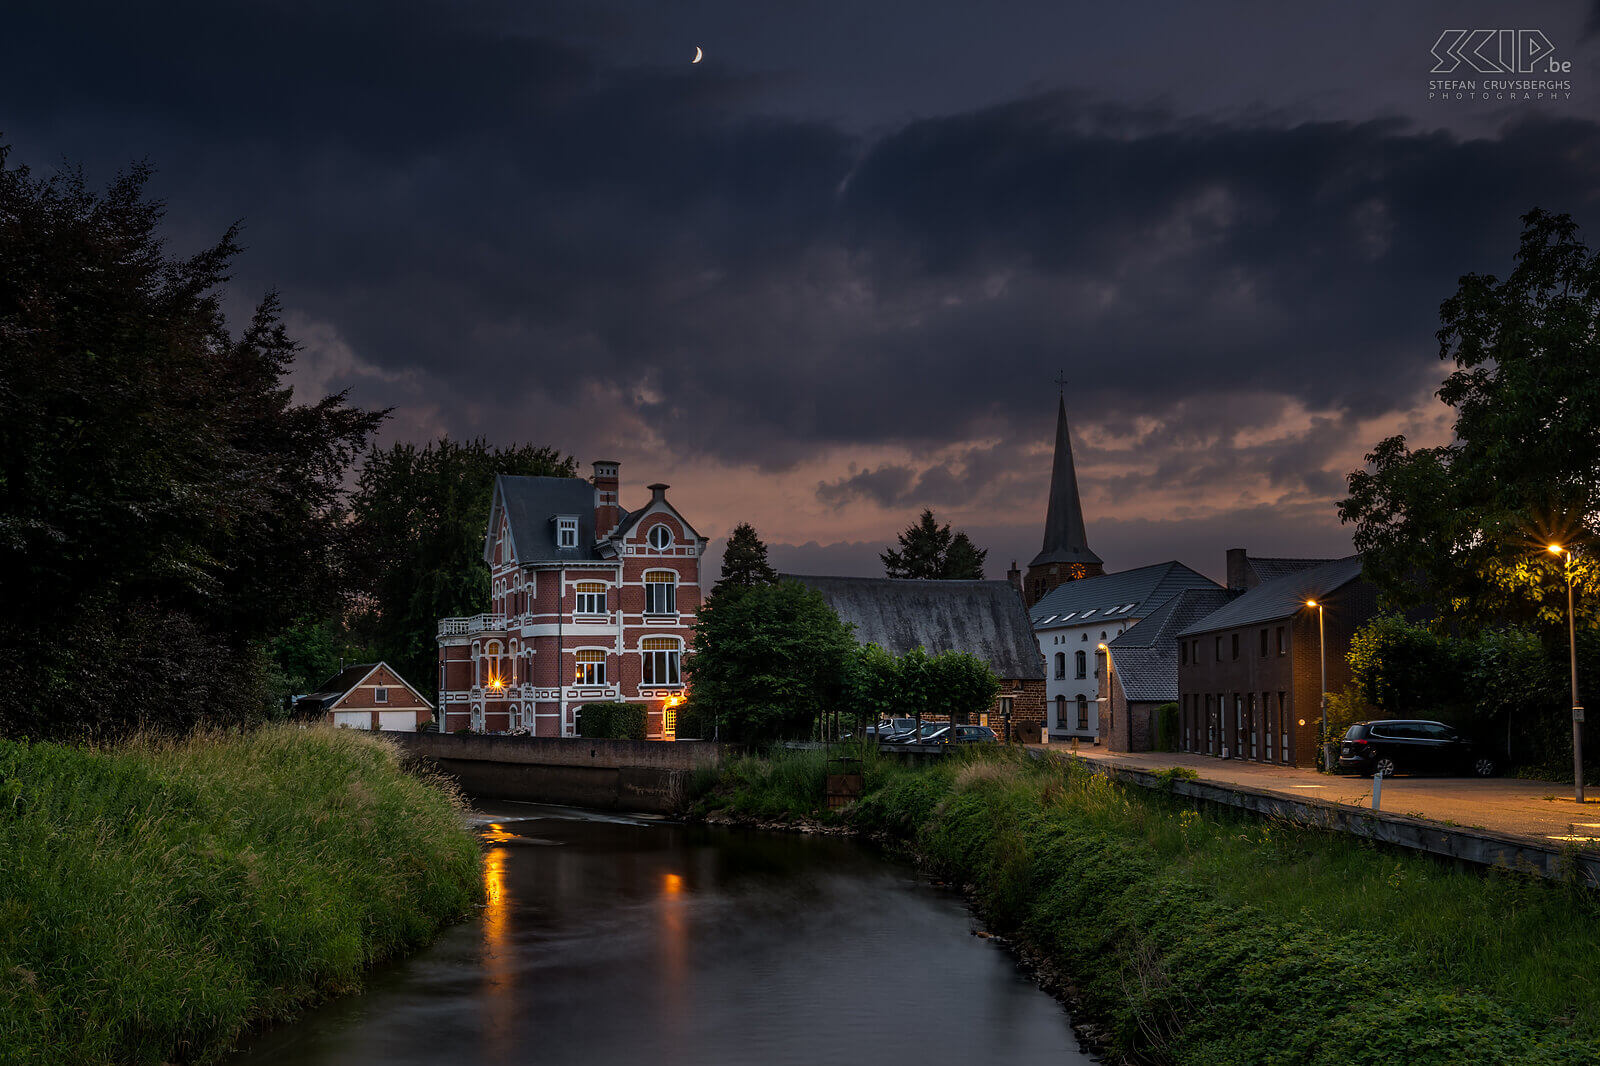 Hageland by night - Demer and Villa Terwolf in Testelt Summer evening on the Demer river with the villa Terwolf in Testelt Stefan Cruysberghs